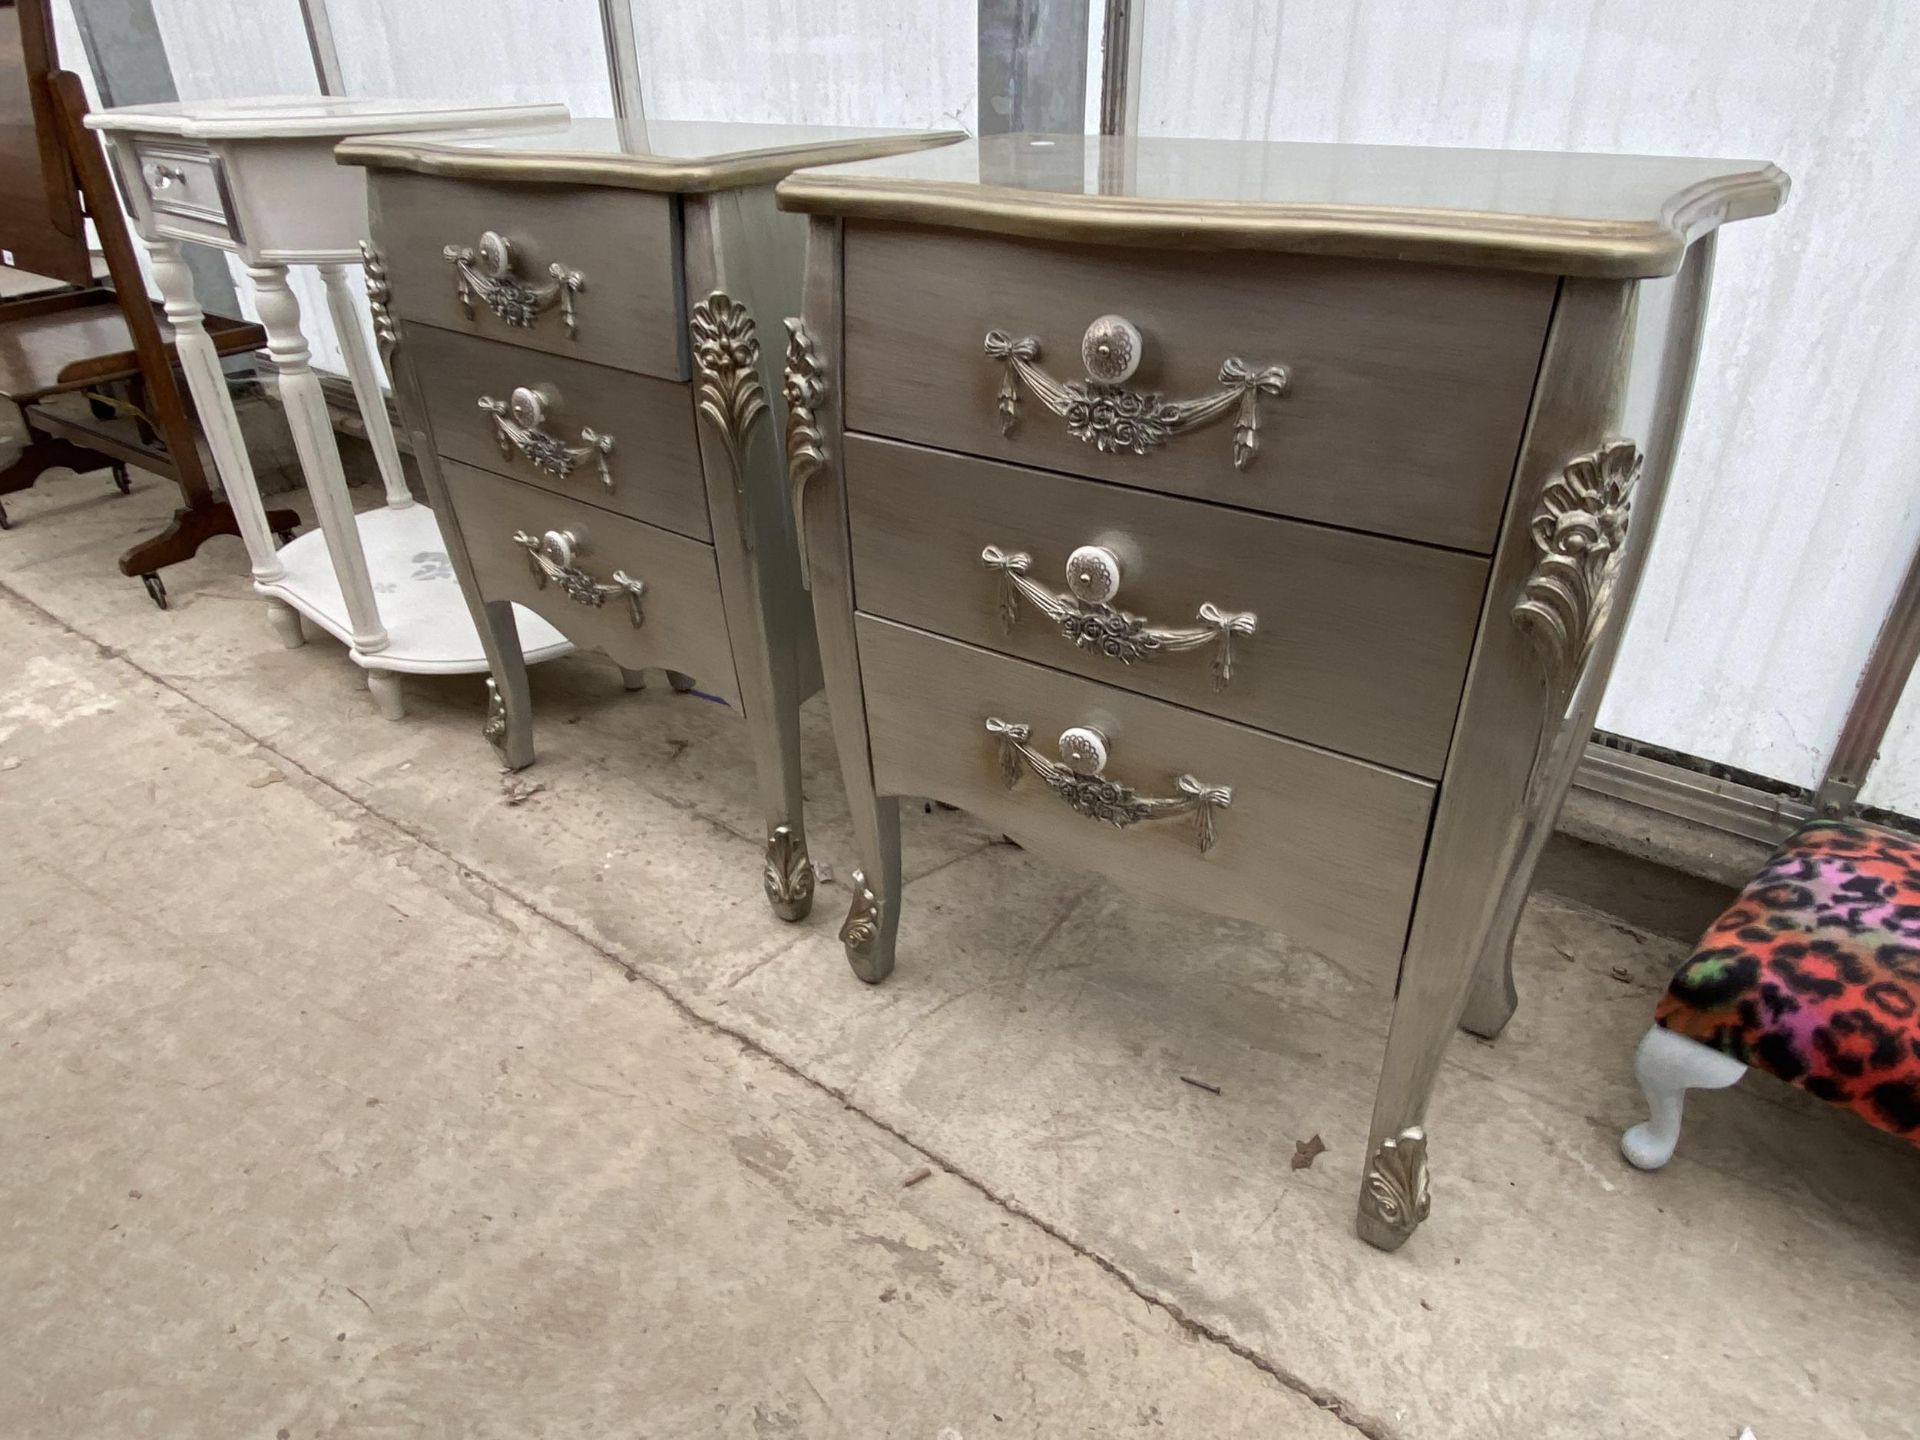 A PAIR OF MODERN SILVER PAINTED THREE DRAWER CHESTS, 24" WIDE EACH - Image 3 of 6